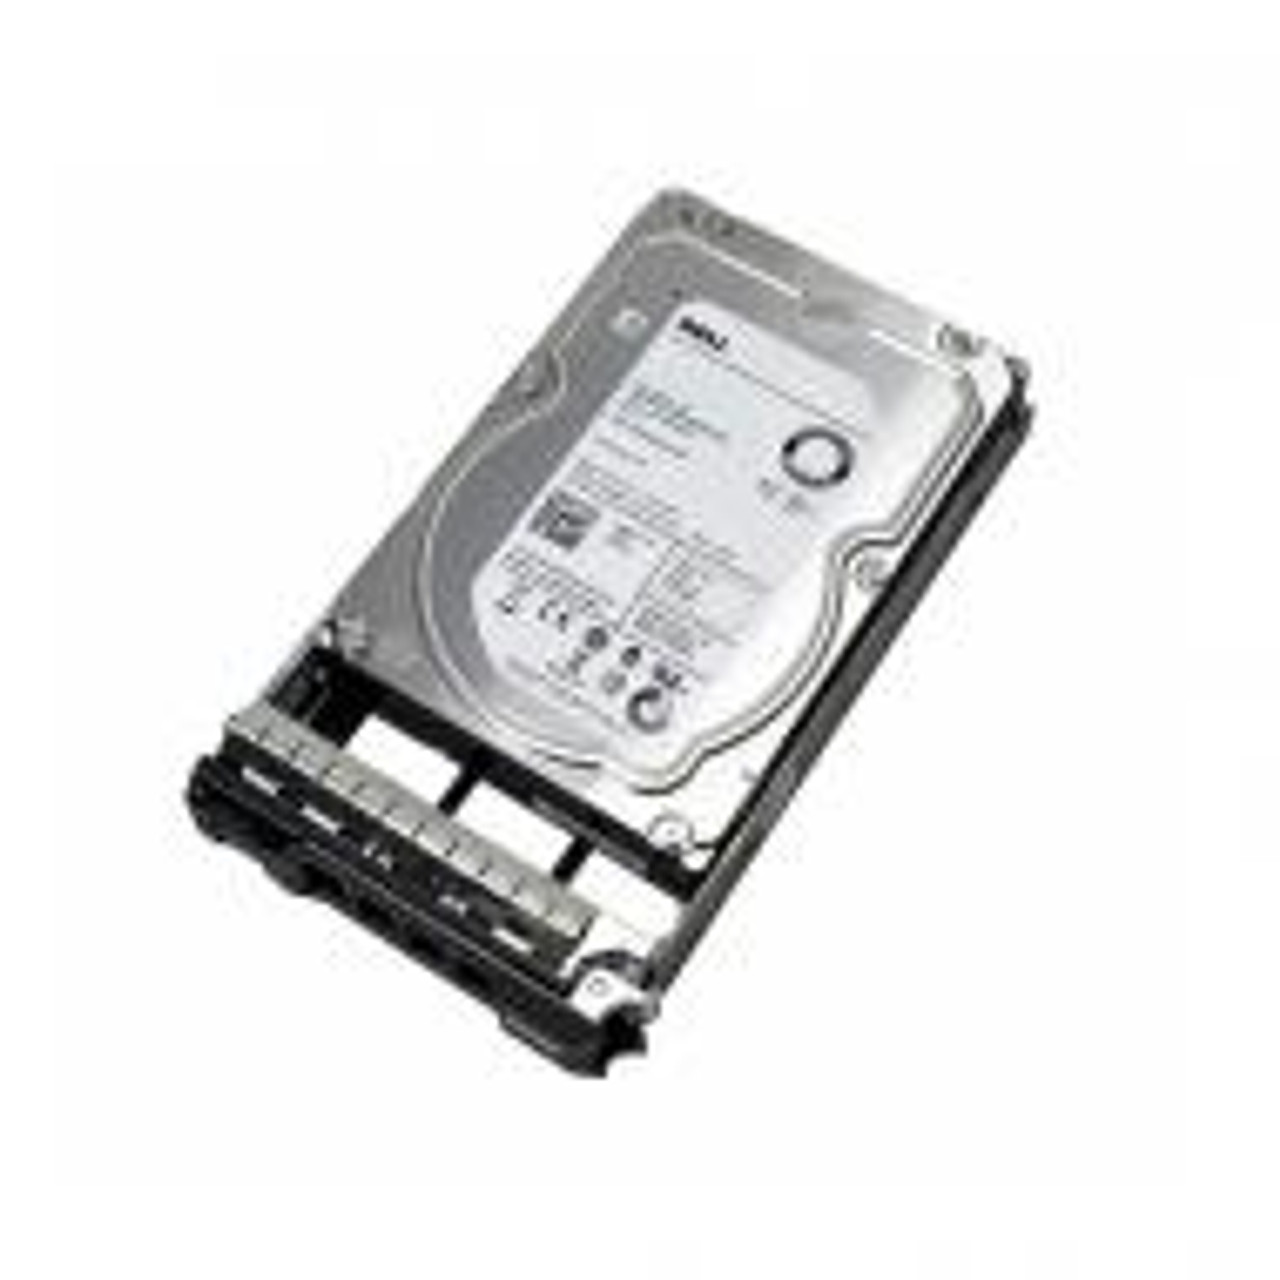 DC959 | Dell | 146gb 15000rpm 80pin Ultra320 Scsi Hot Swap 3.5 Inch Low Profile(1.0 Inch) Hard Disk Drive With Tray